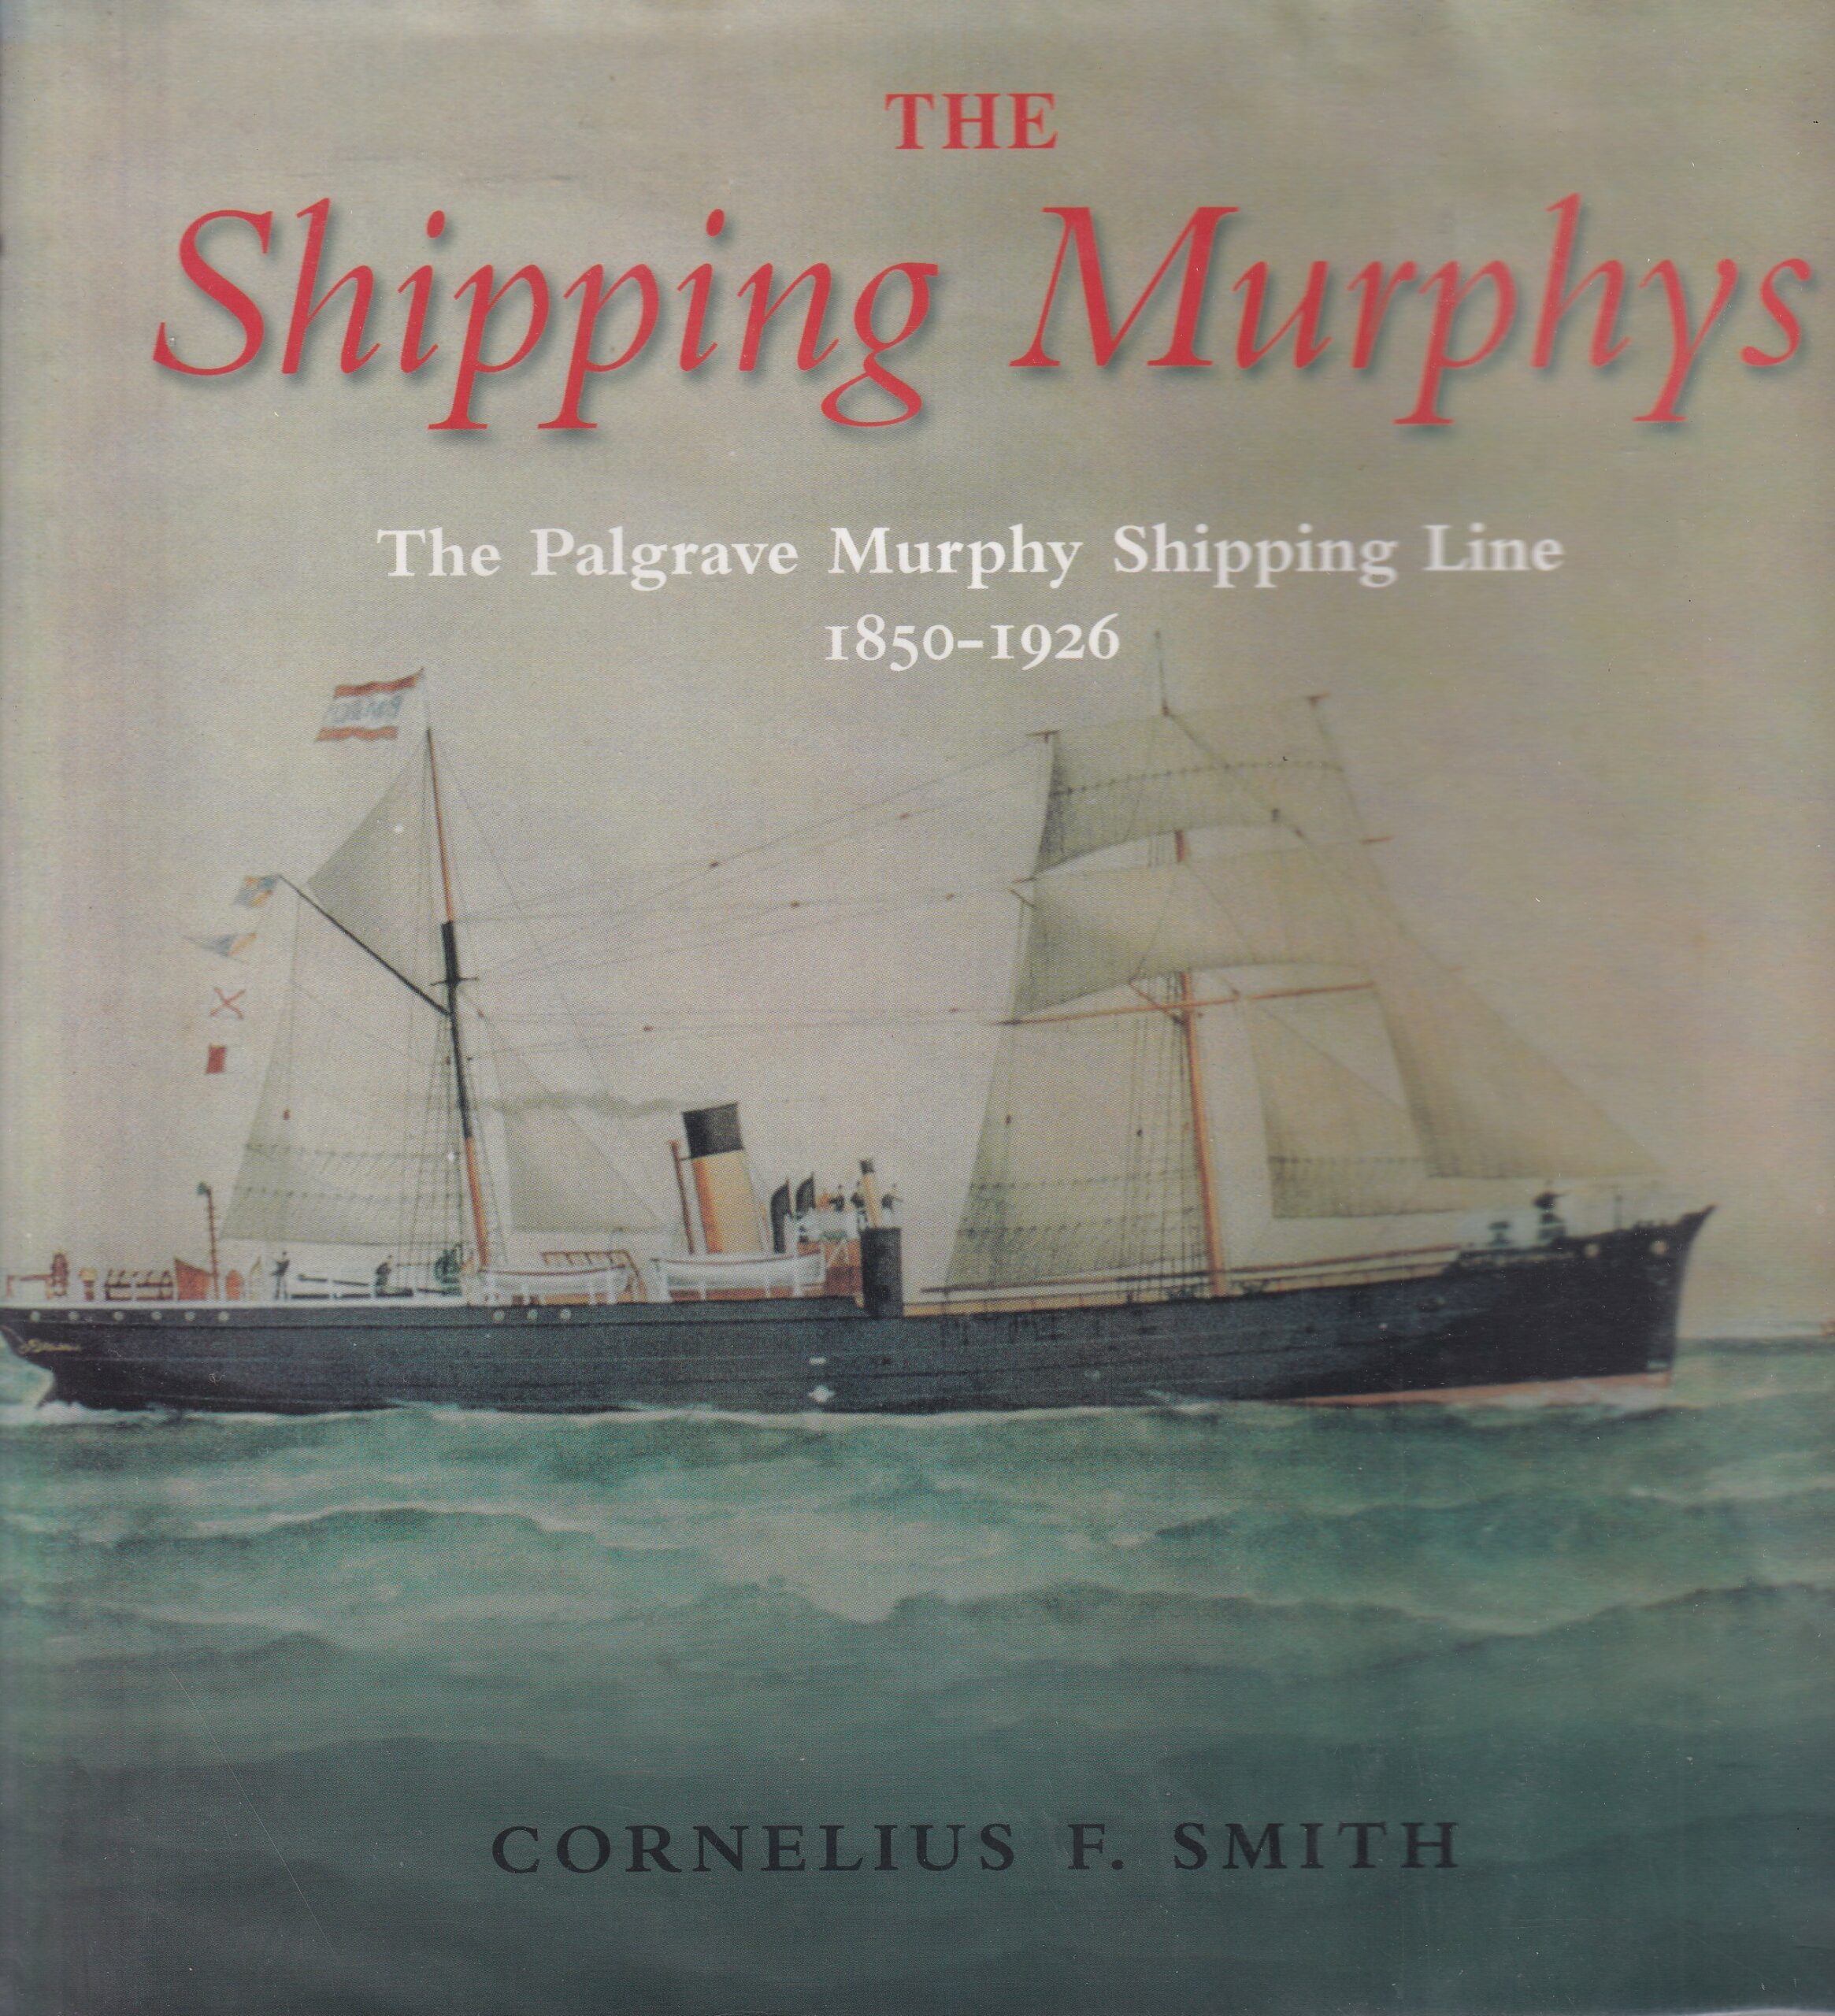 The Shipping Murphy’s: The Palgrave Murphy Shipping Line 1850-1926 | Cornelius F. Smith | Charlie Byrne's